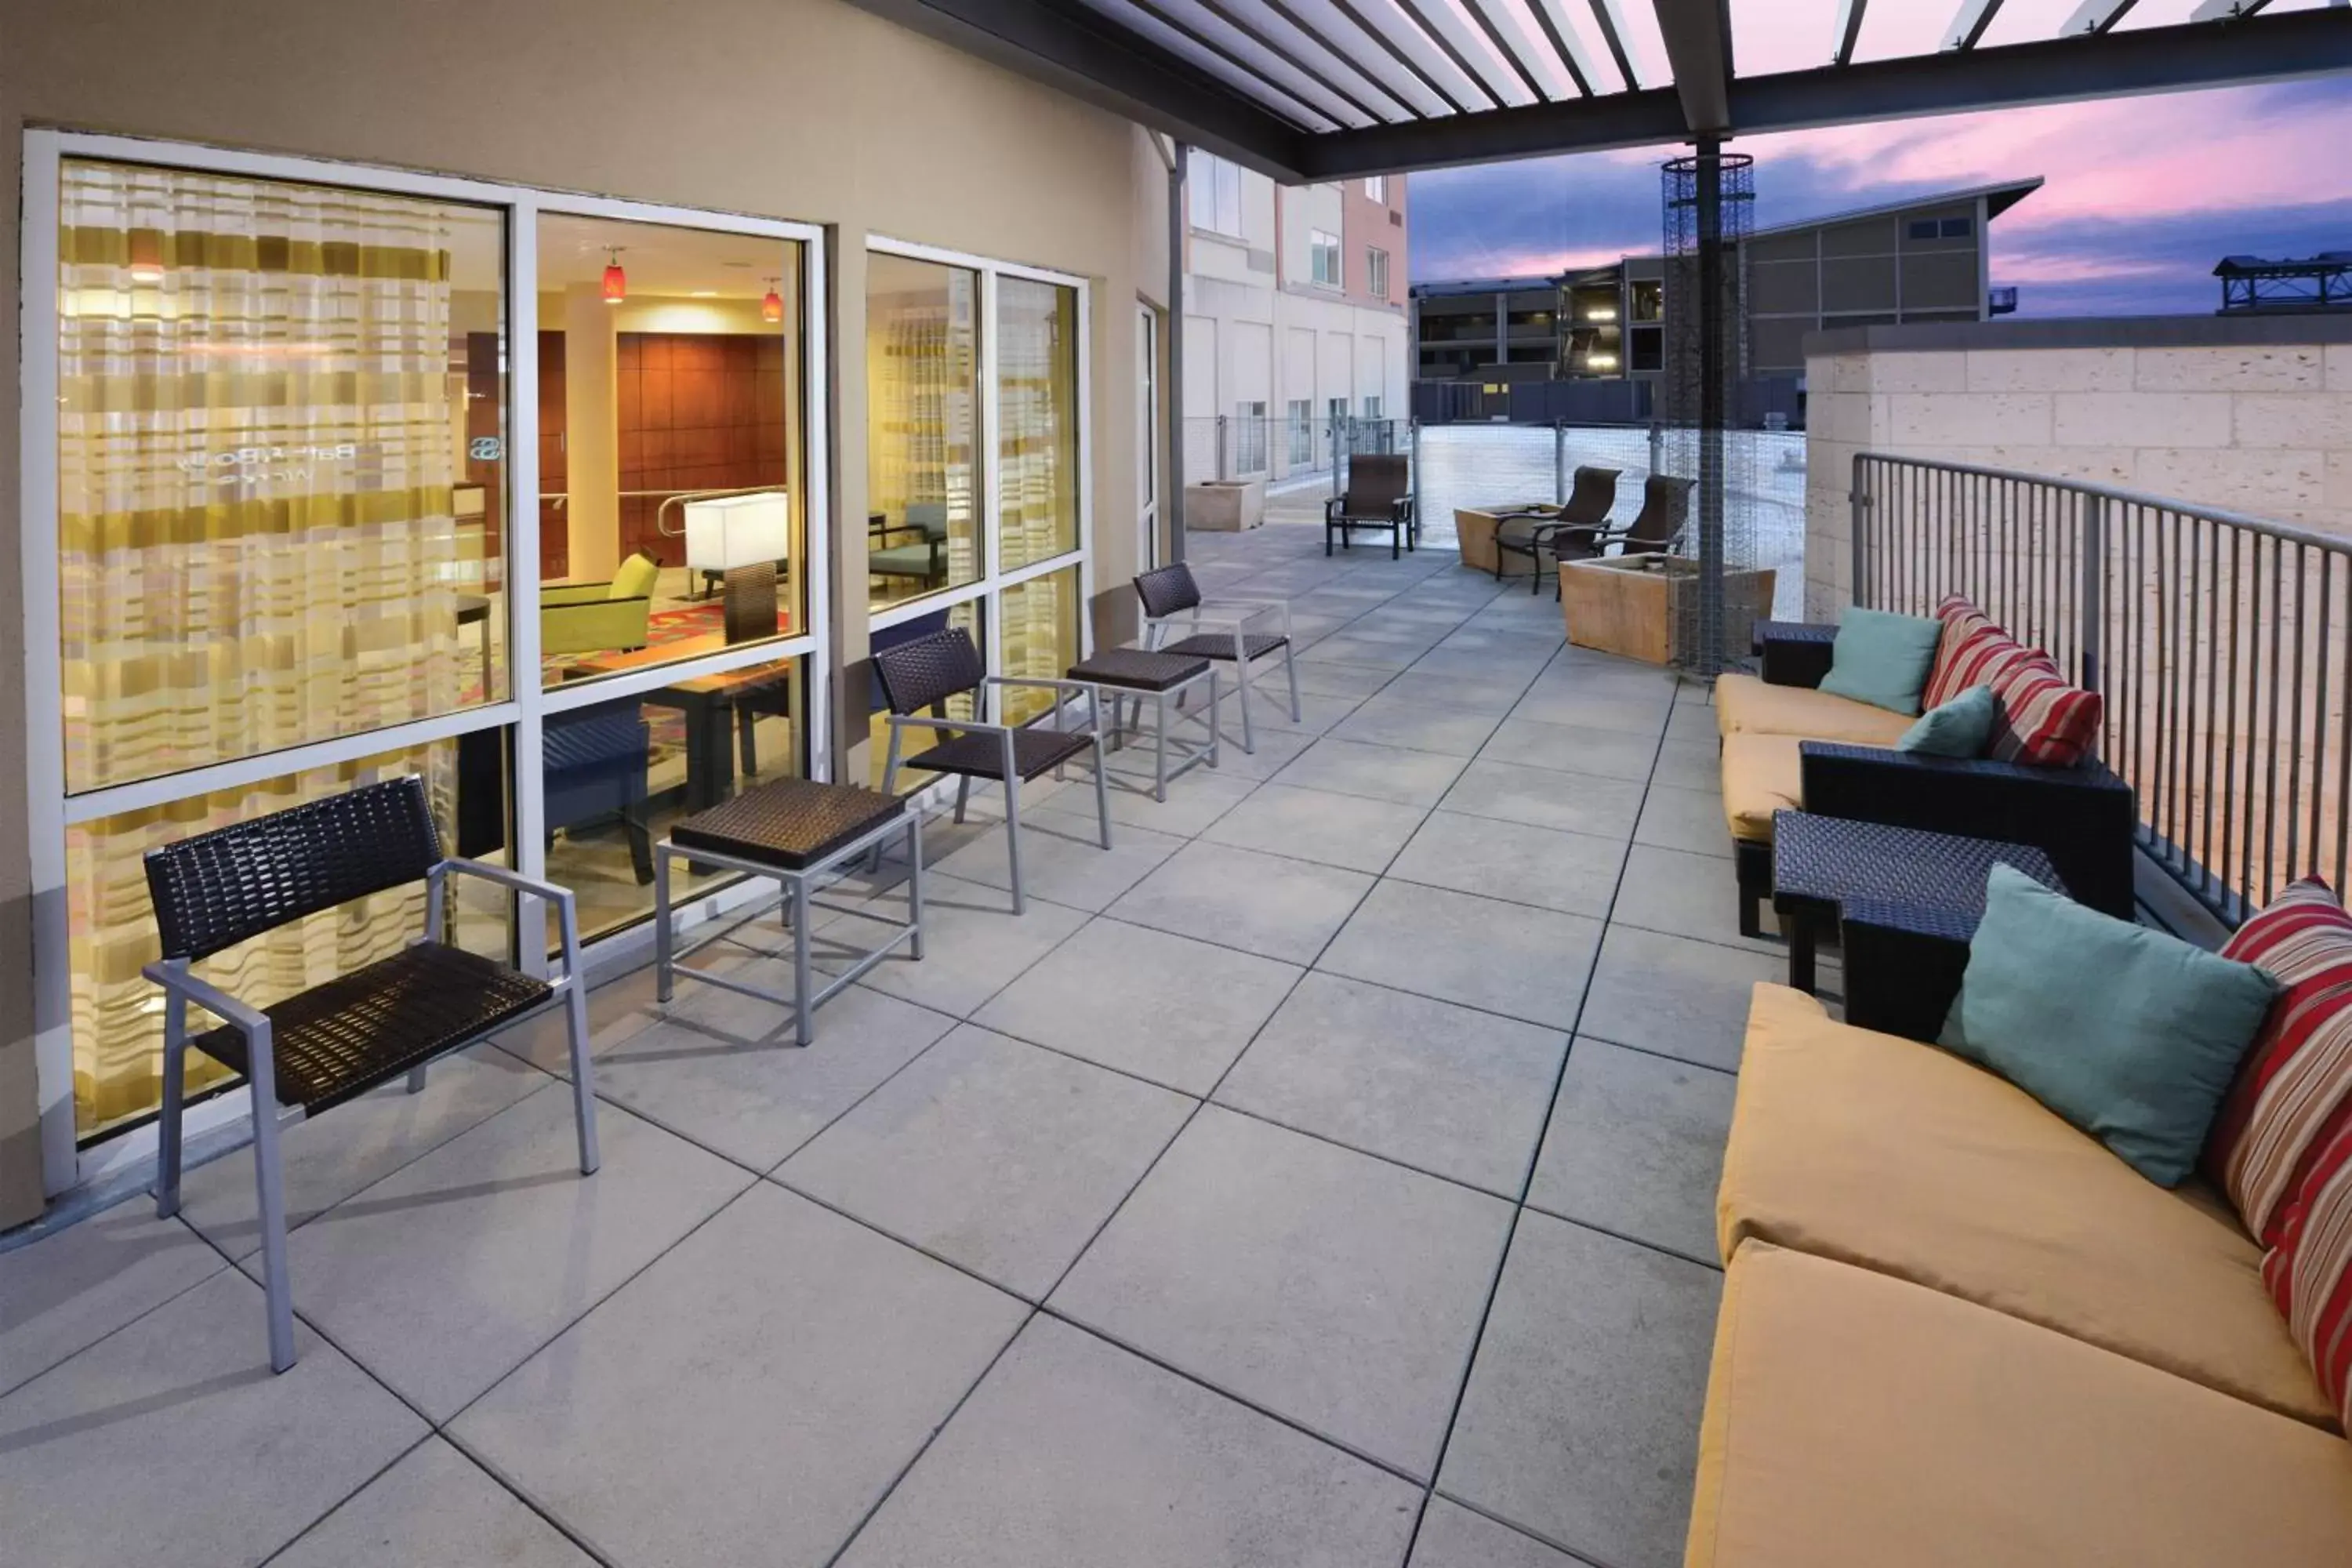 Property building in Courtyard Marriott Houston Pearland